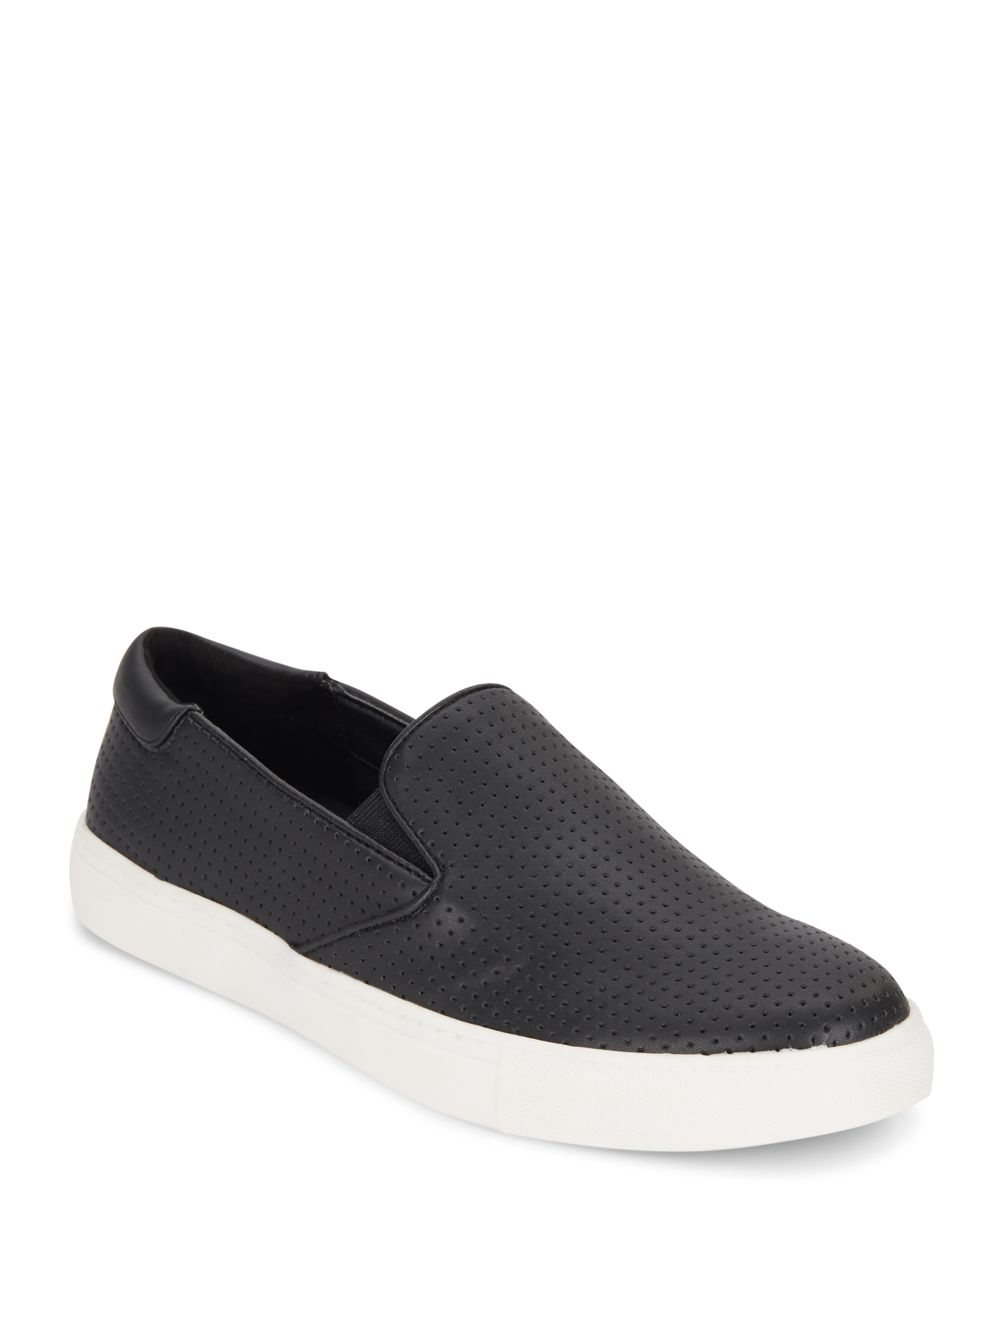 kenneth cole slip on shoes cheap online